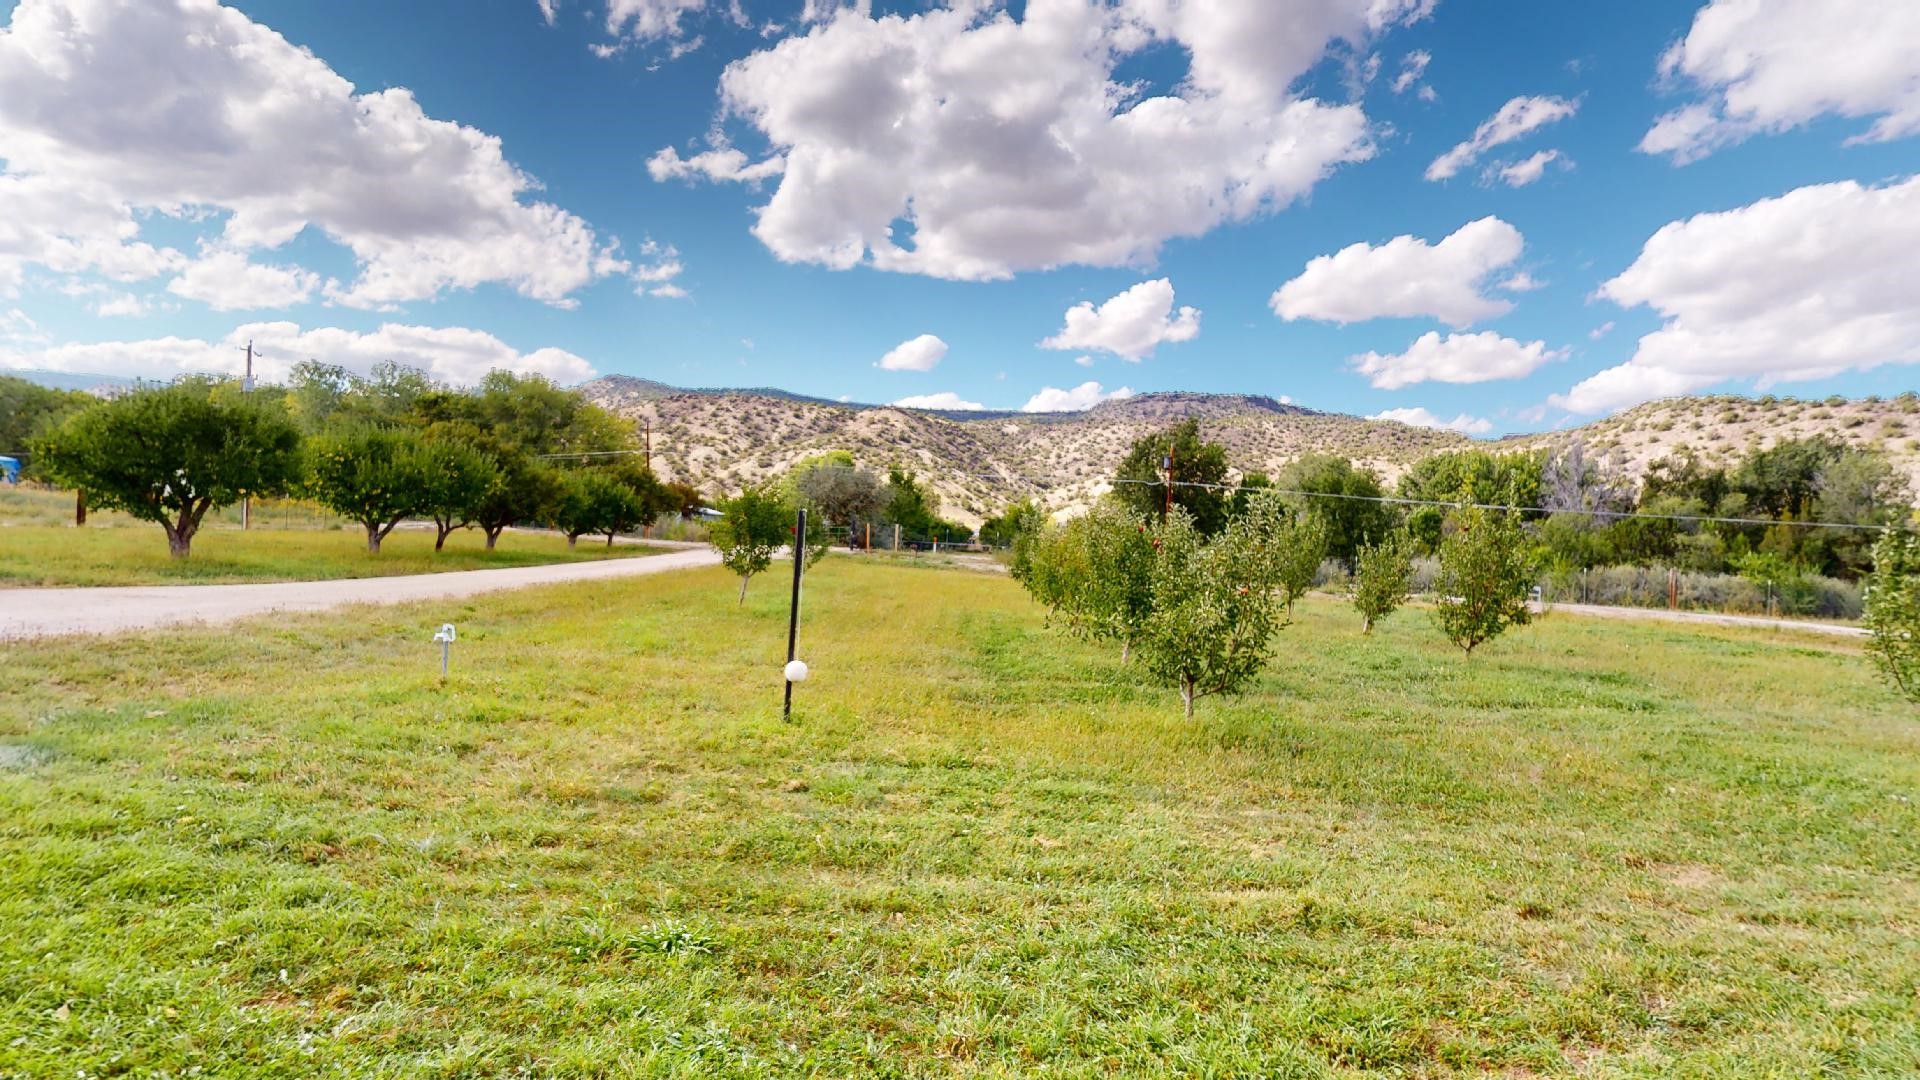 828 County Road 57, Velarde, New Mexico 87582, 4 Bedrooms Bedrooms, ,3 BathroomsBathrooms,Residential,For Sale,828 County Road 57,202233150